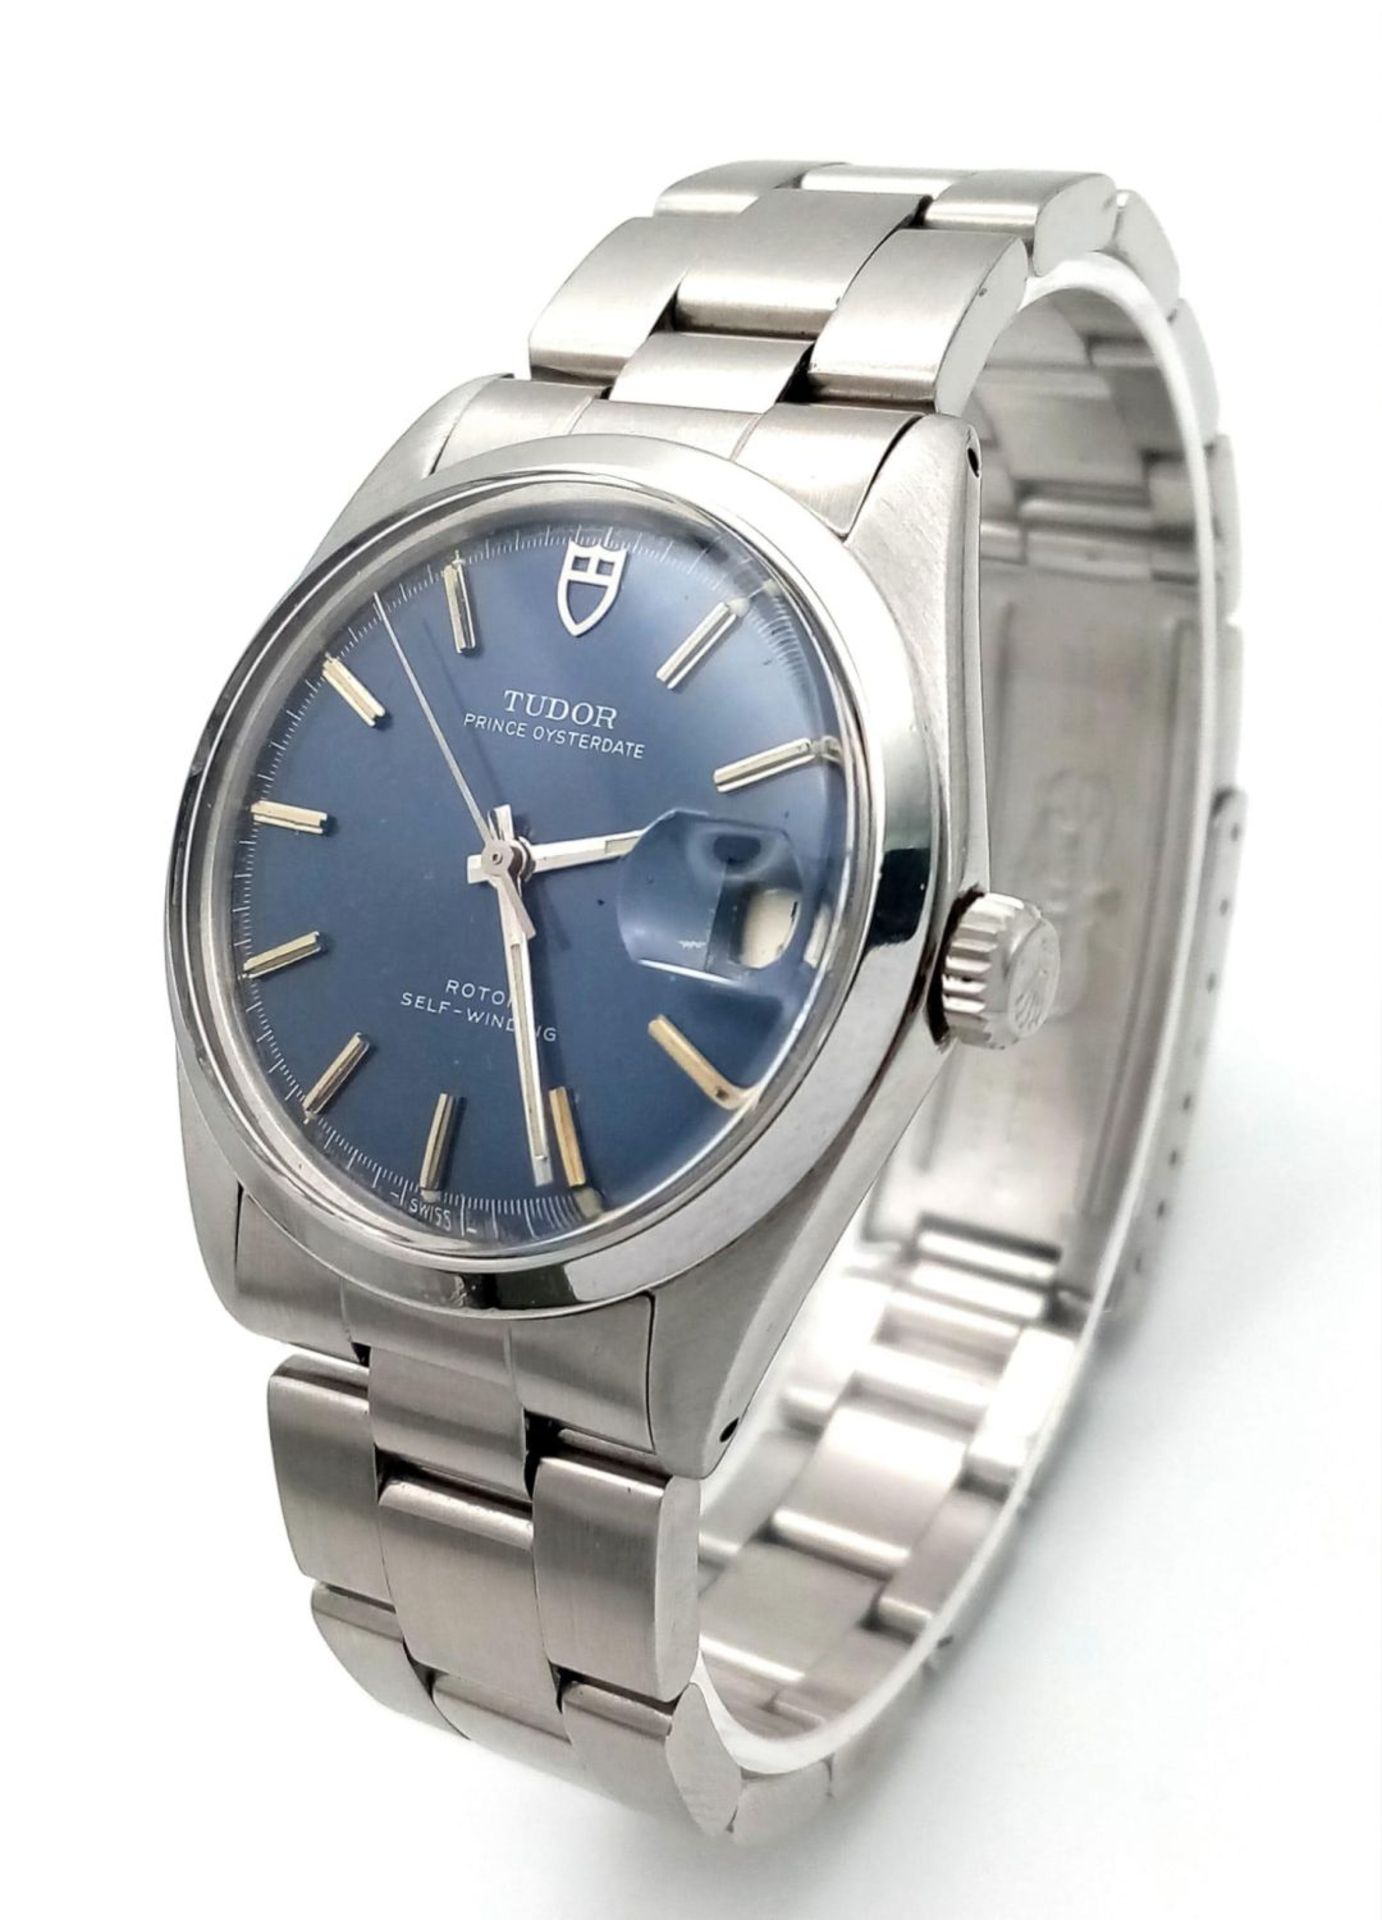 AN IMMACULATE TUDOR "PRINCE OYSTERDATE" AUTOMATIC STAINLESS STEL WATCH (ROLEX CASE AND STRAP) WITH - Bild 2 aus 7